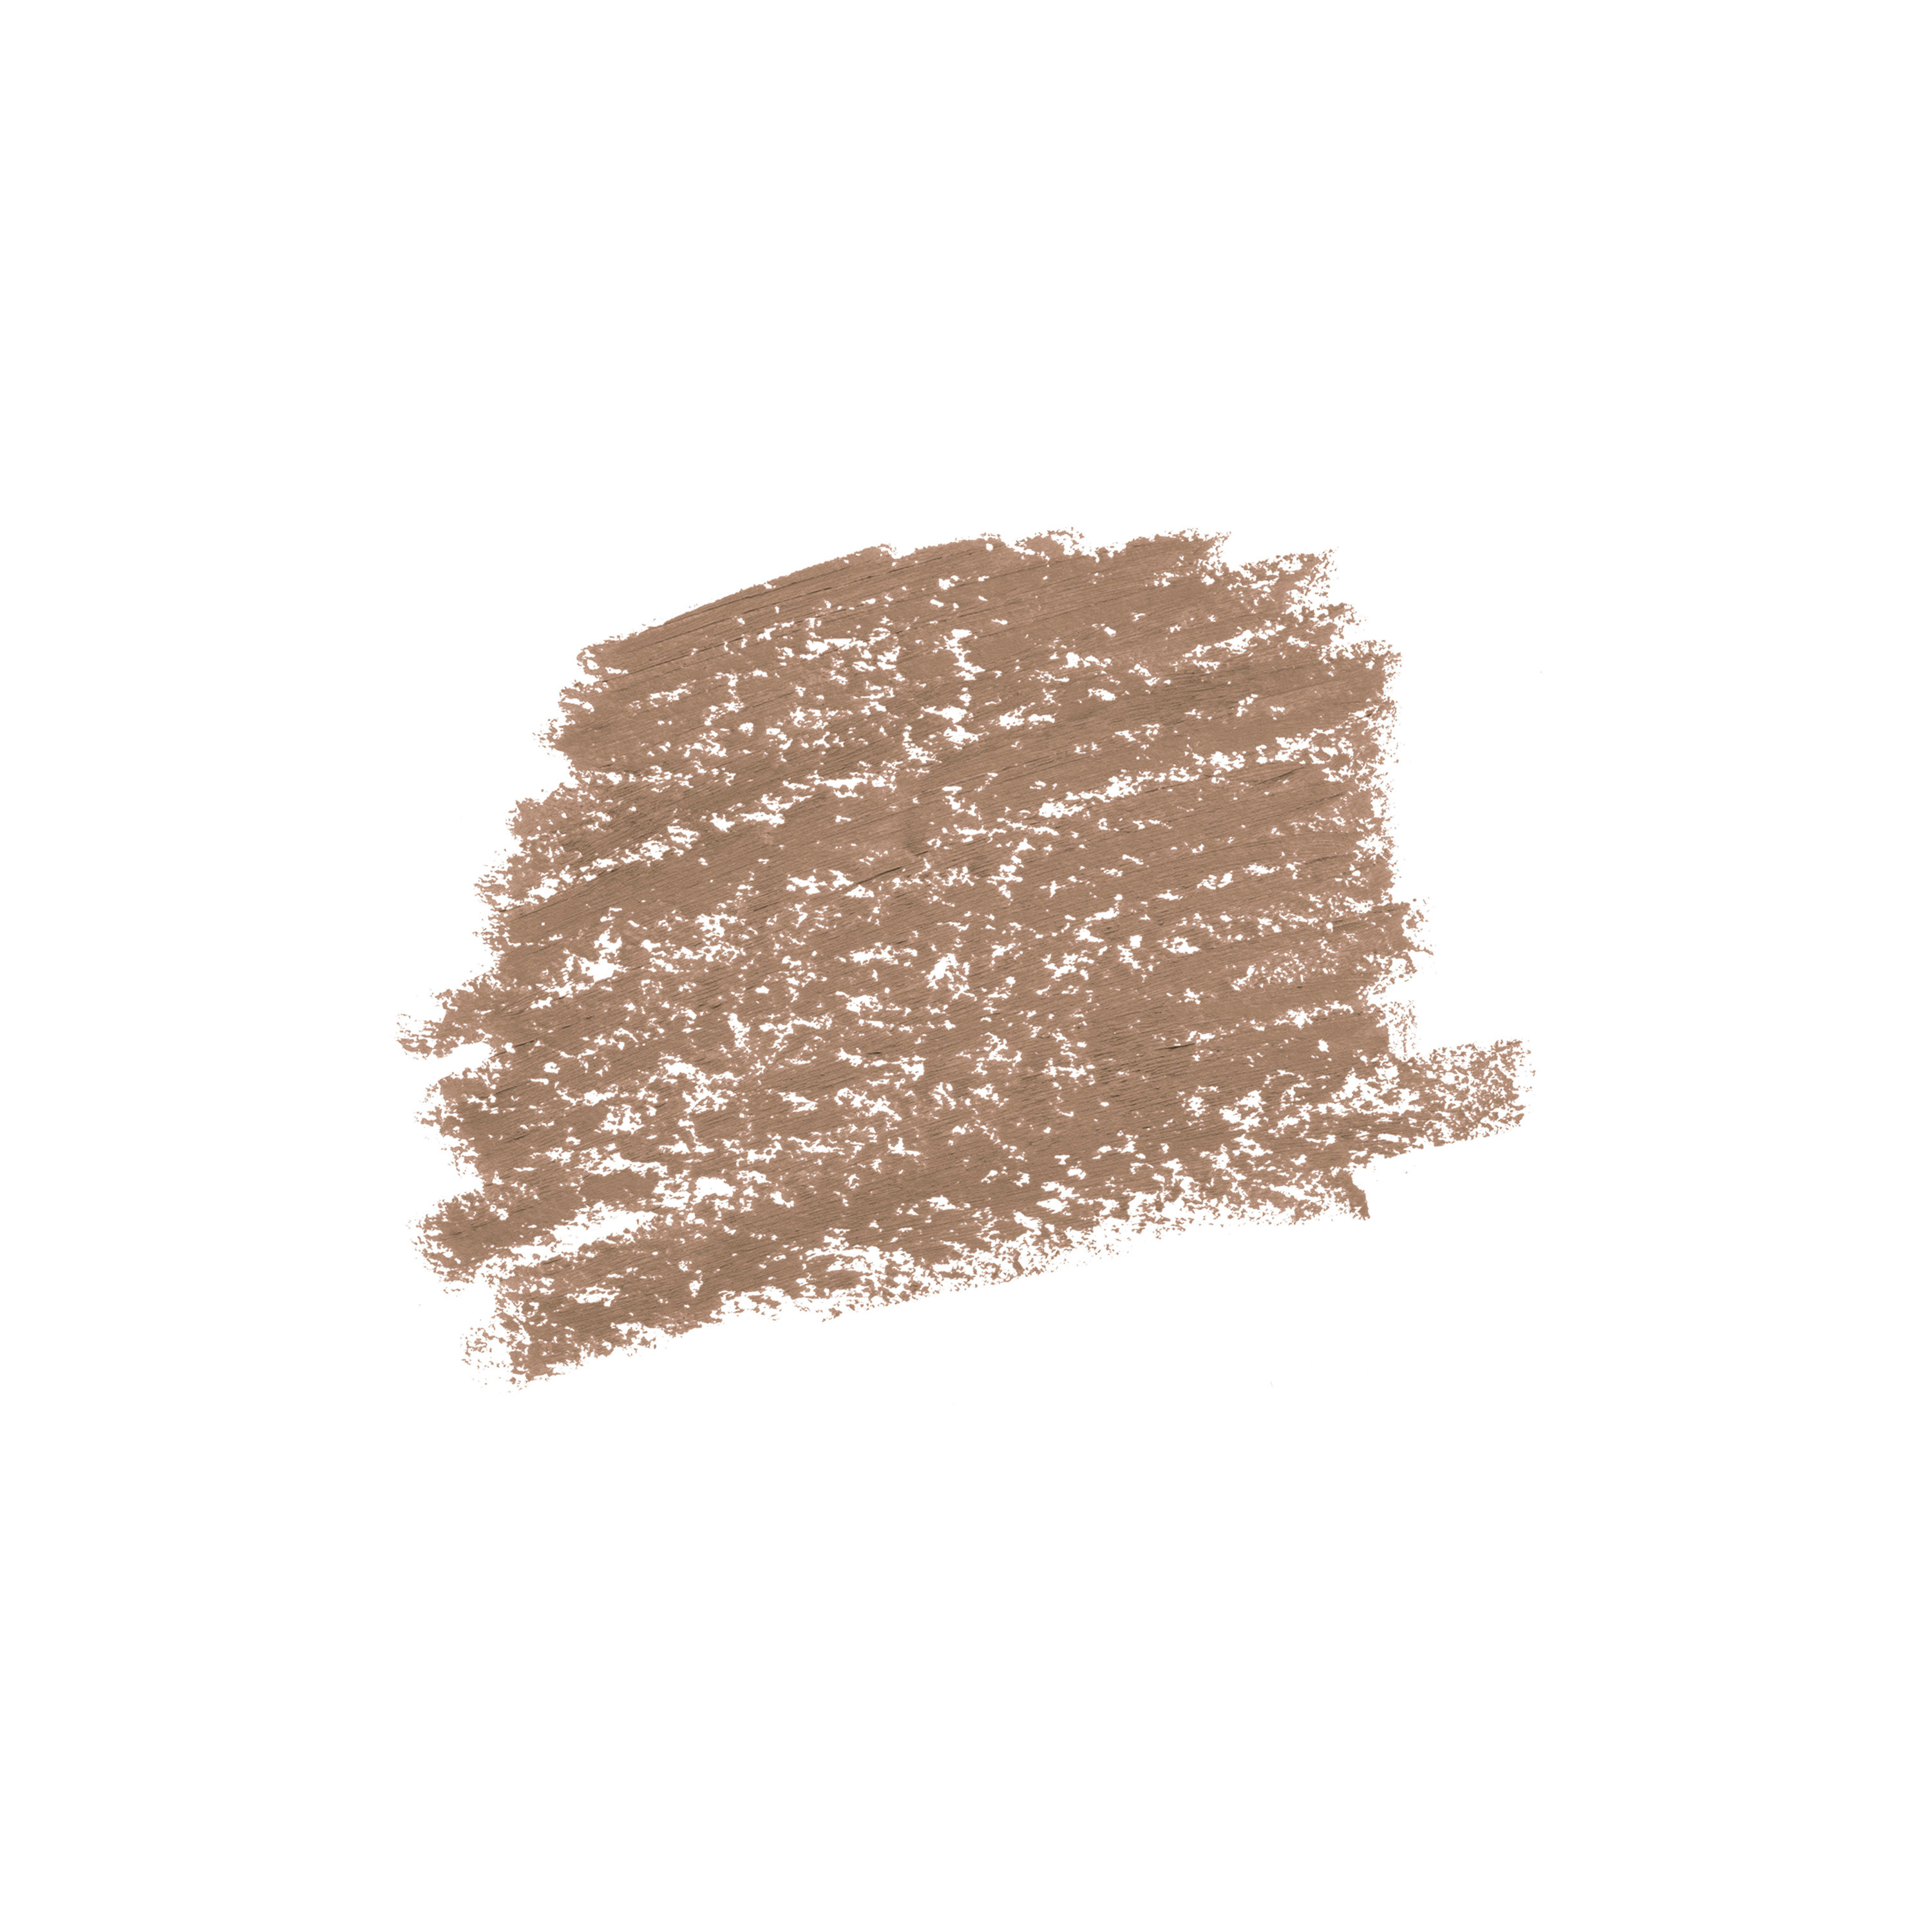 Powder Pencil For Eyebrows - 61 cappuccino, Light Brown, large image number 2